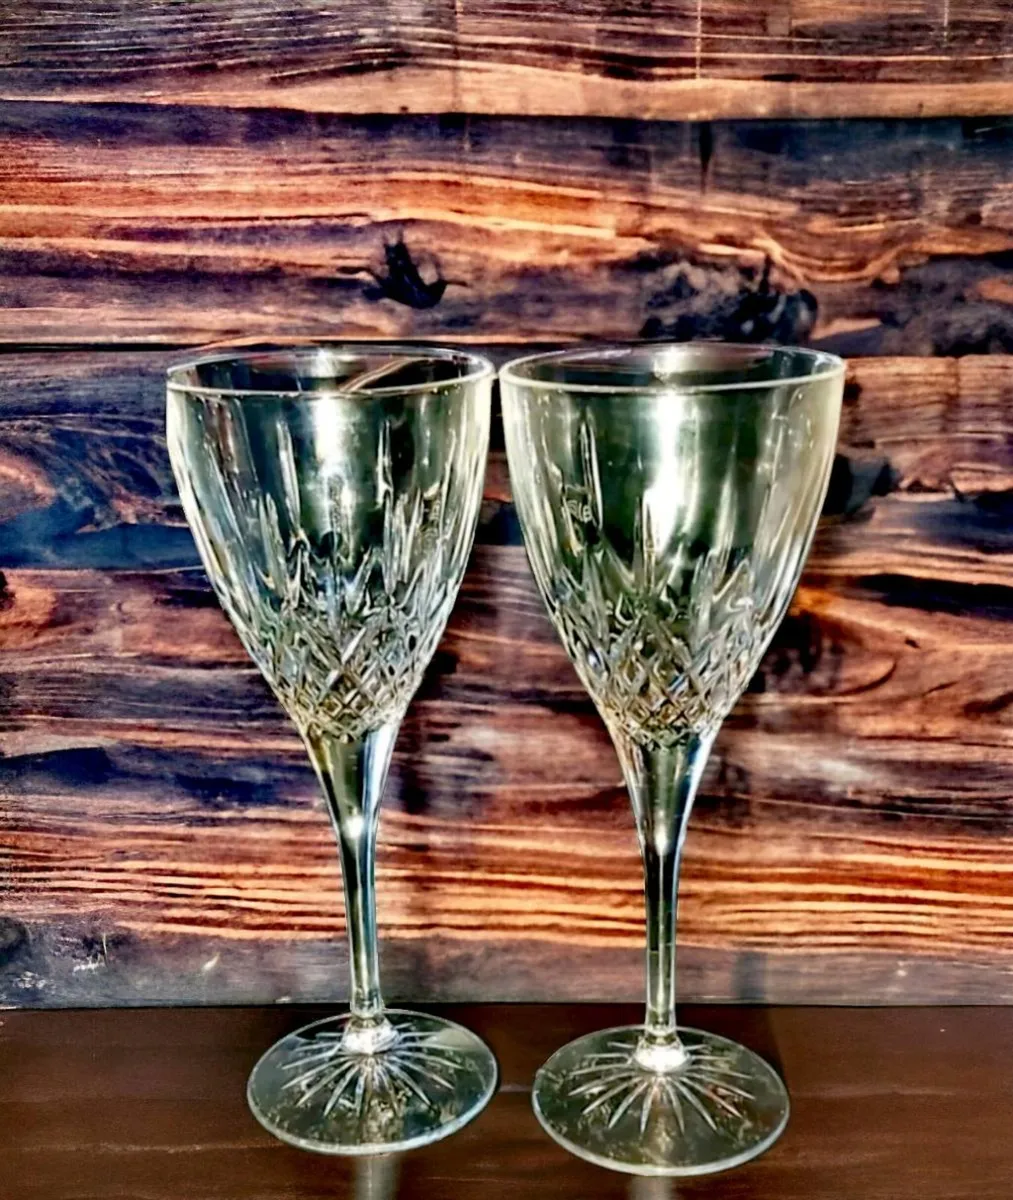 Pair of Royal Doulton Erslwood goblets - Image 1